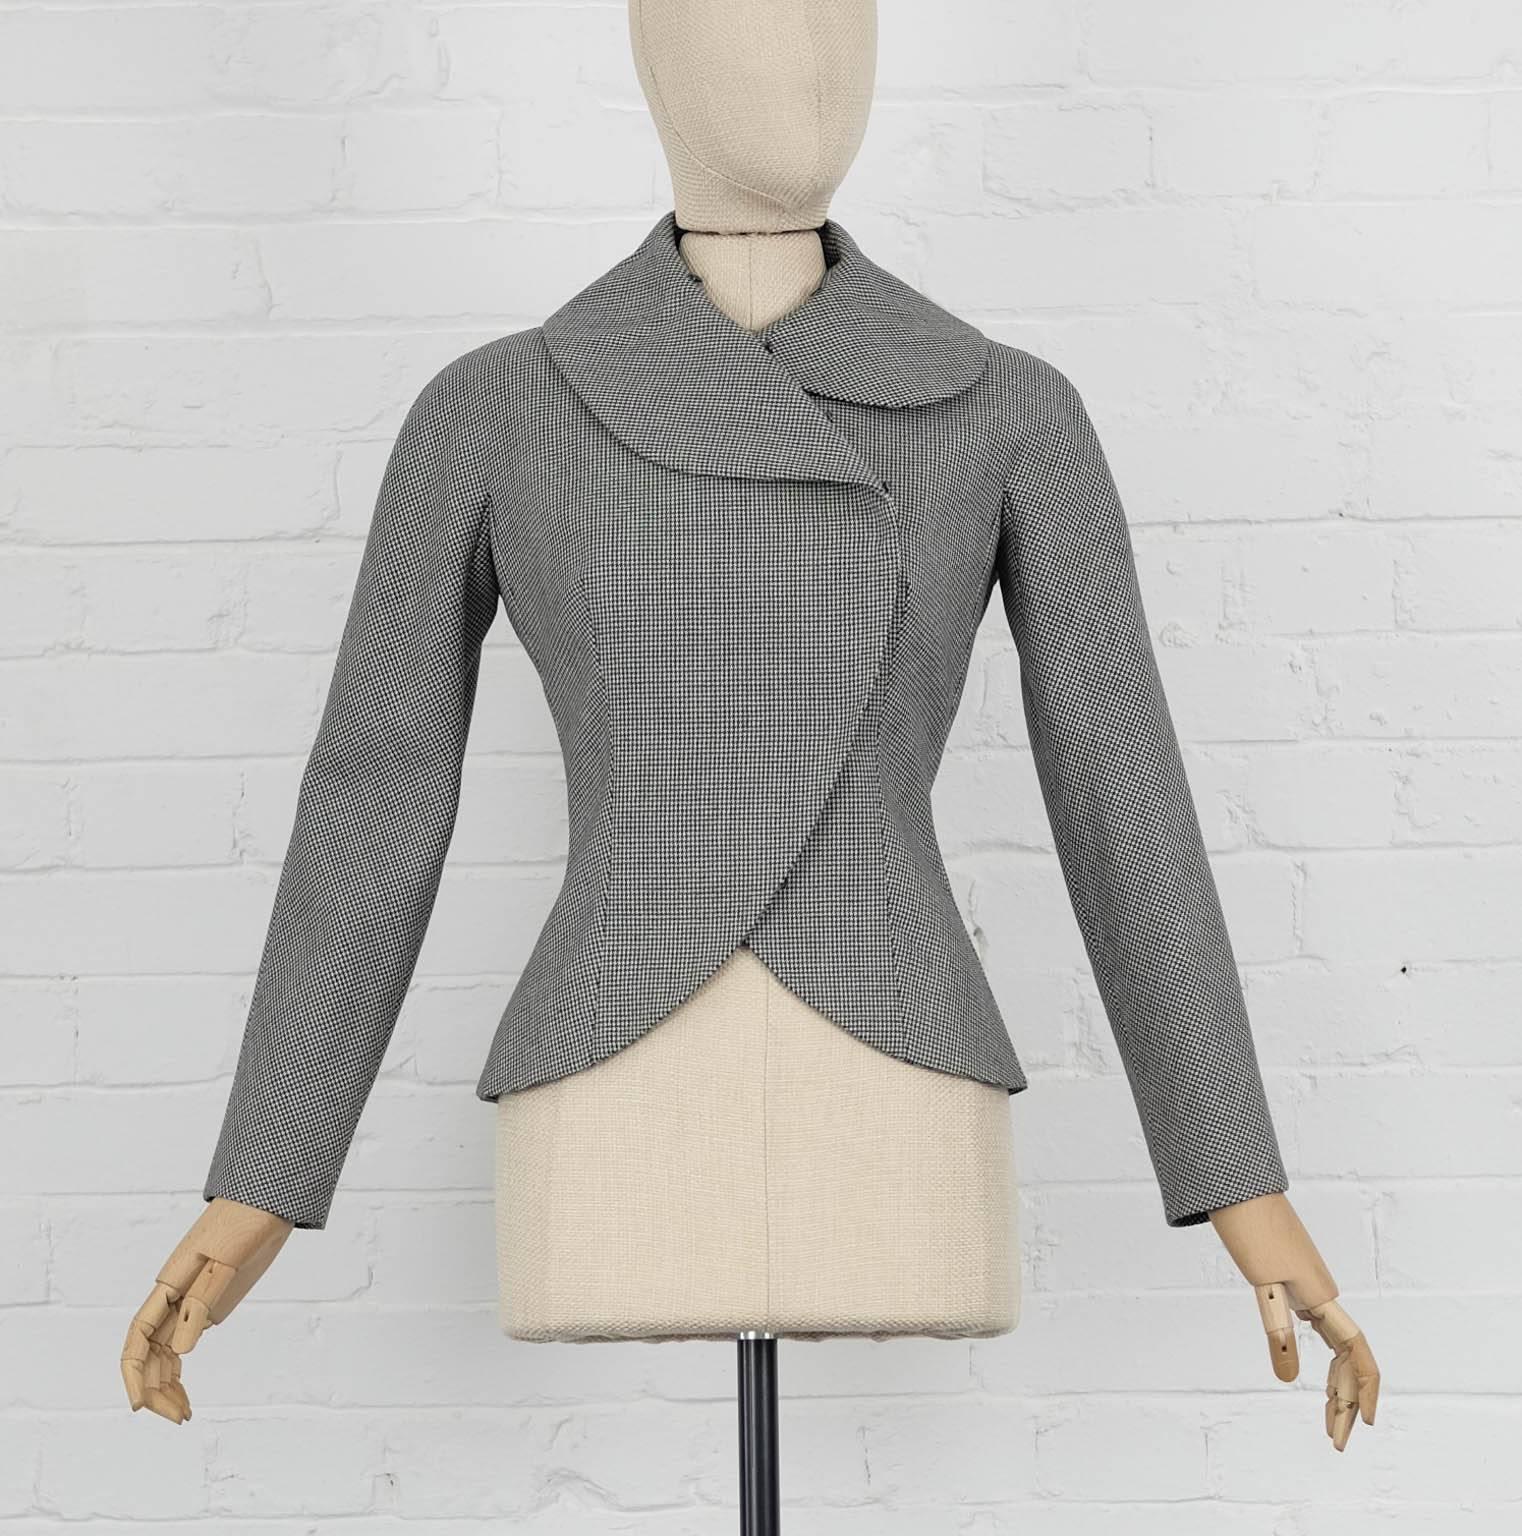 1990's CHRISTIAN DIOR by John Galliano Houndstooth fox fur jacket and skirt suit For Sale 1